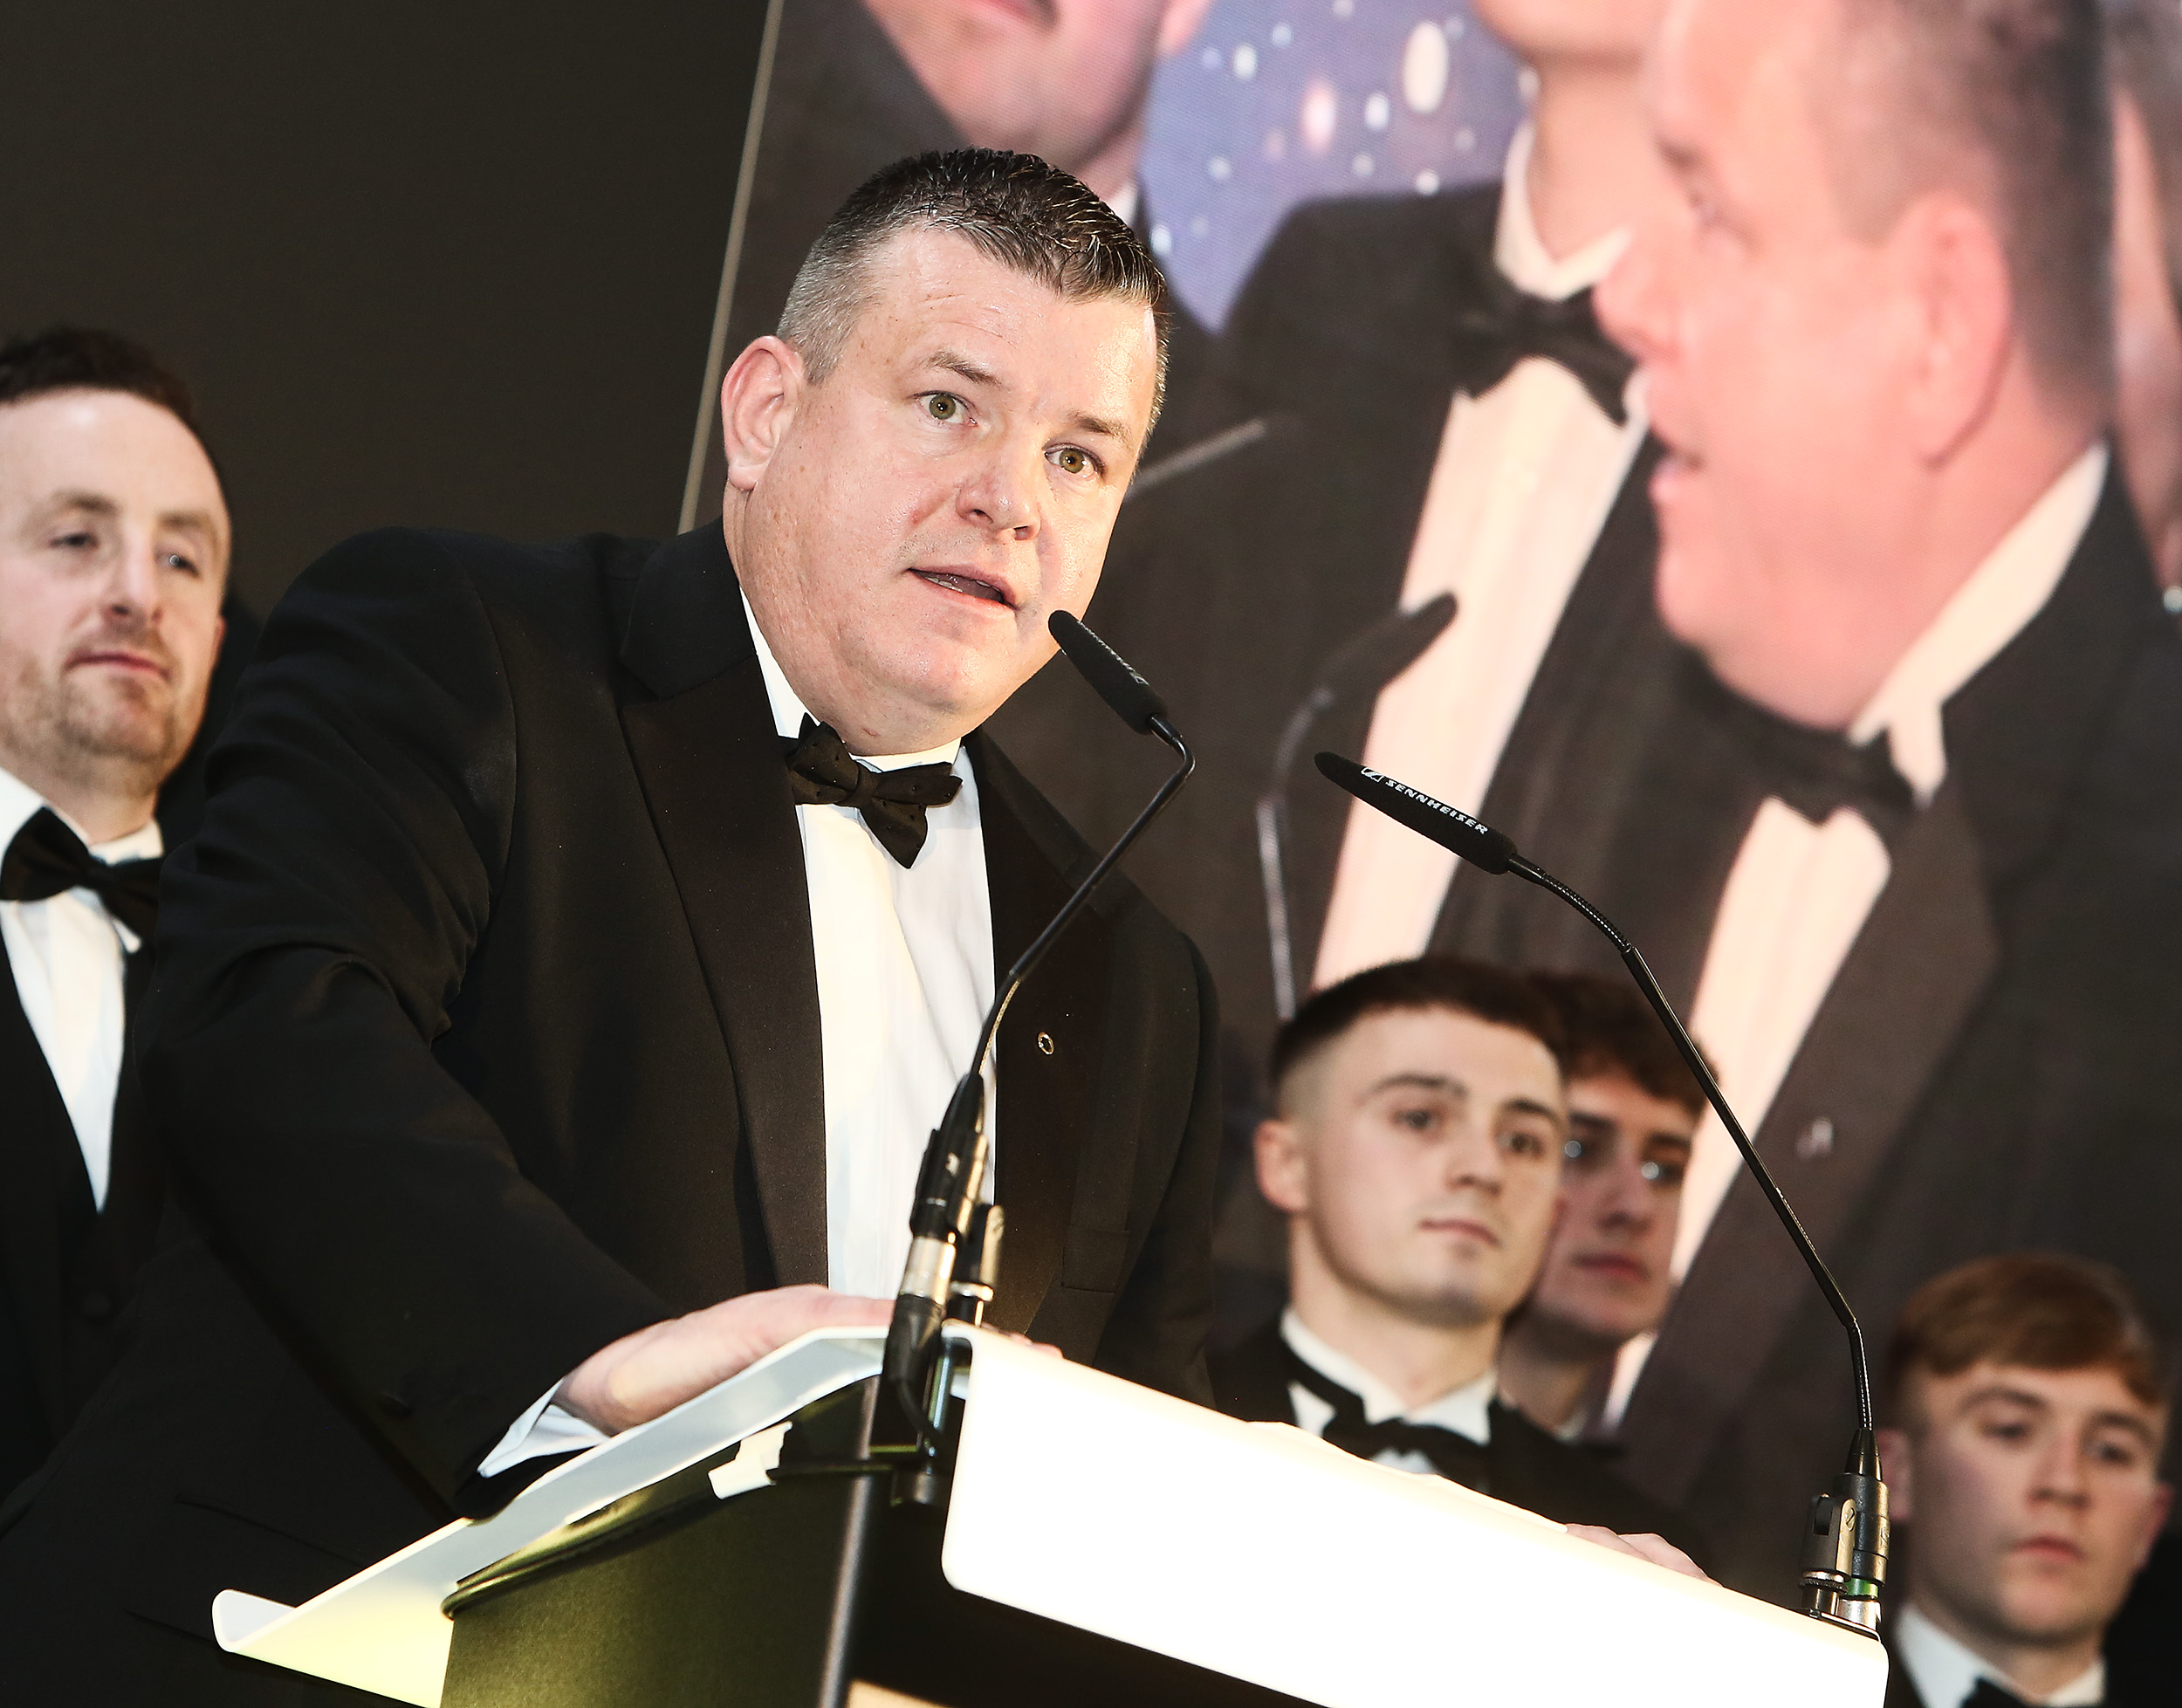 Niall Murphy addresses the Aisling Awards gala after picking up the Sports Award on behalf of his club Naomh Éanna CLG